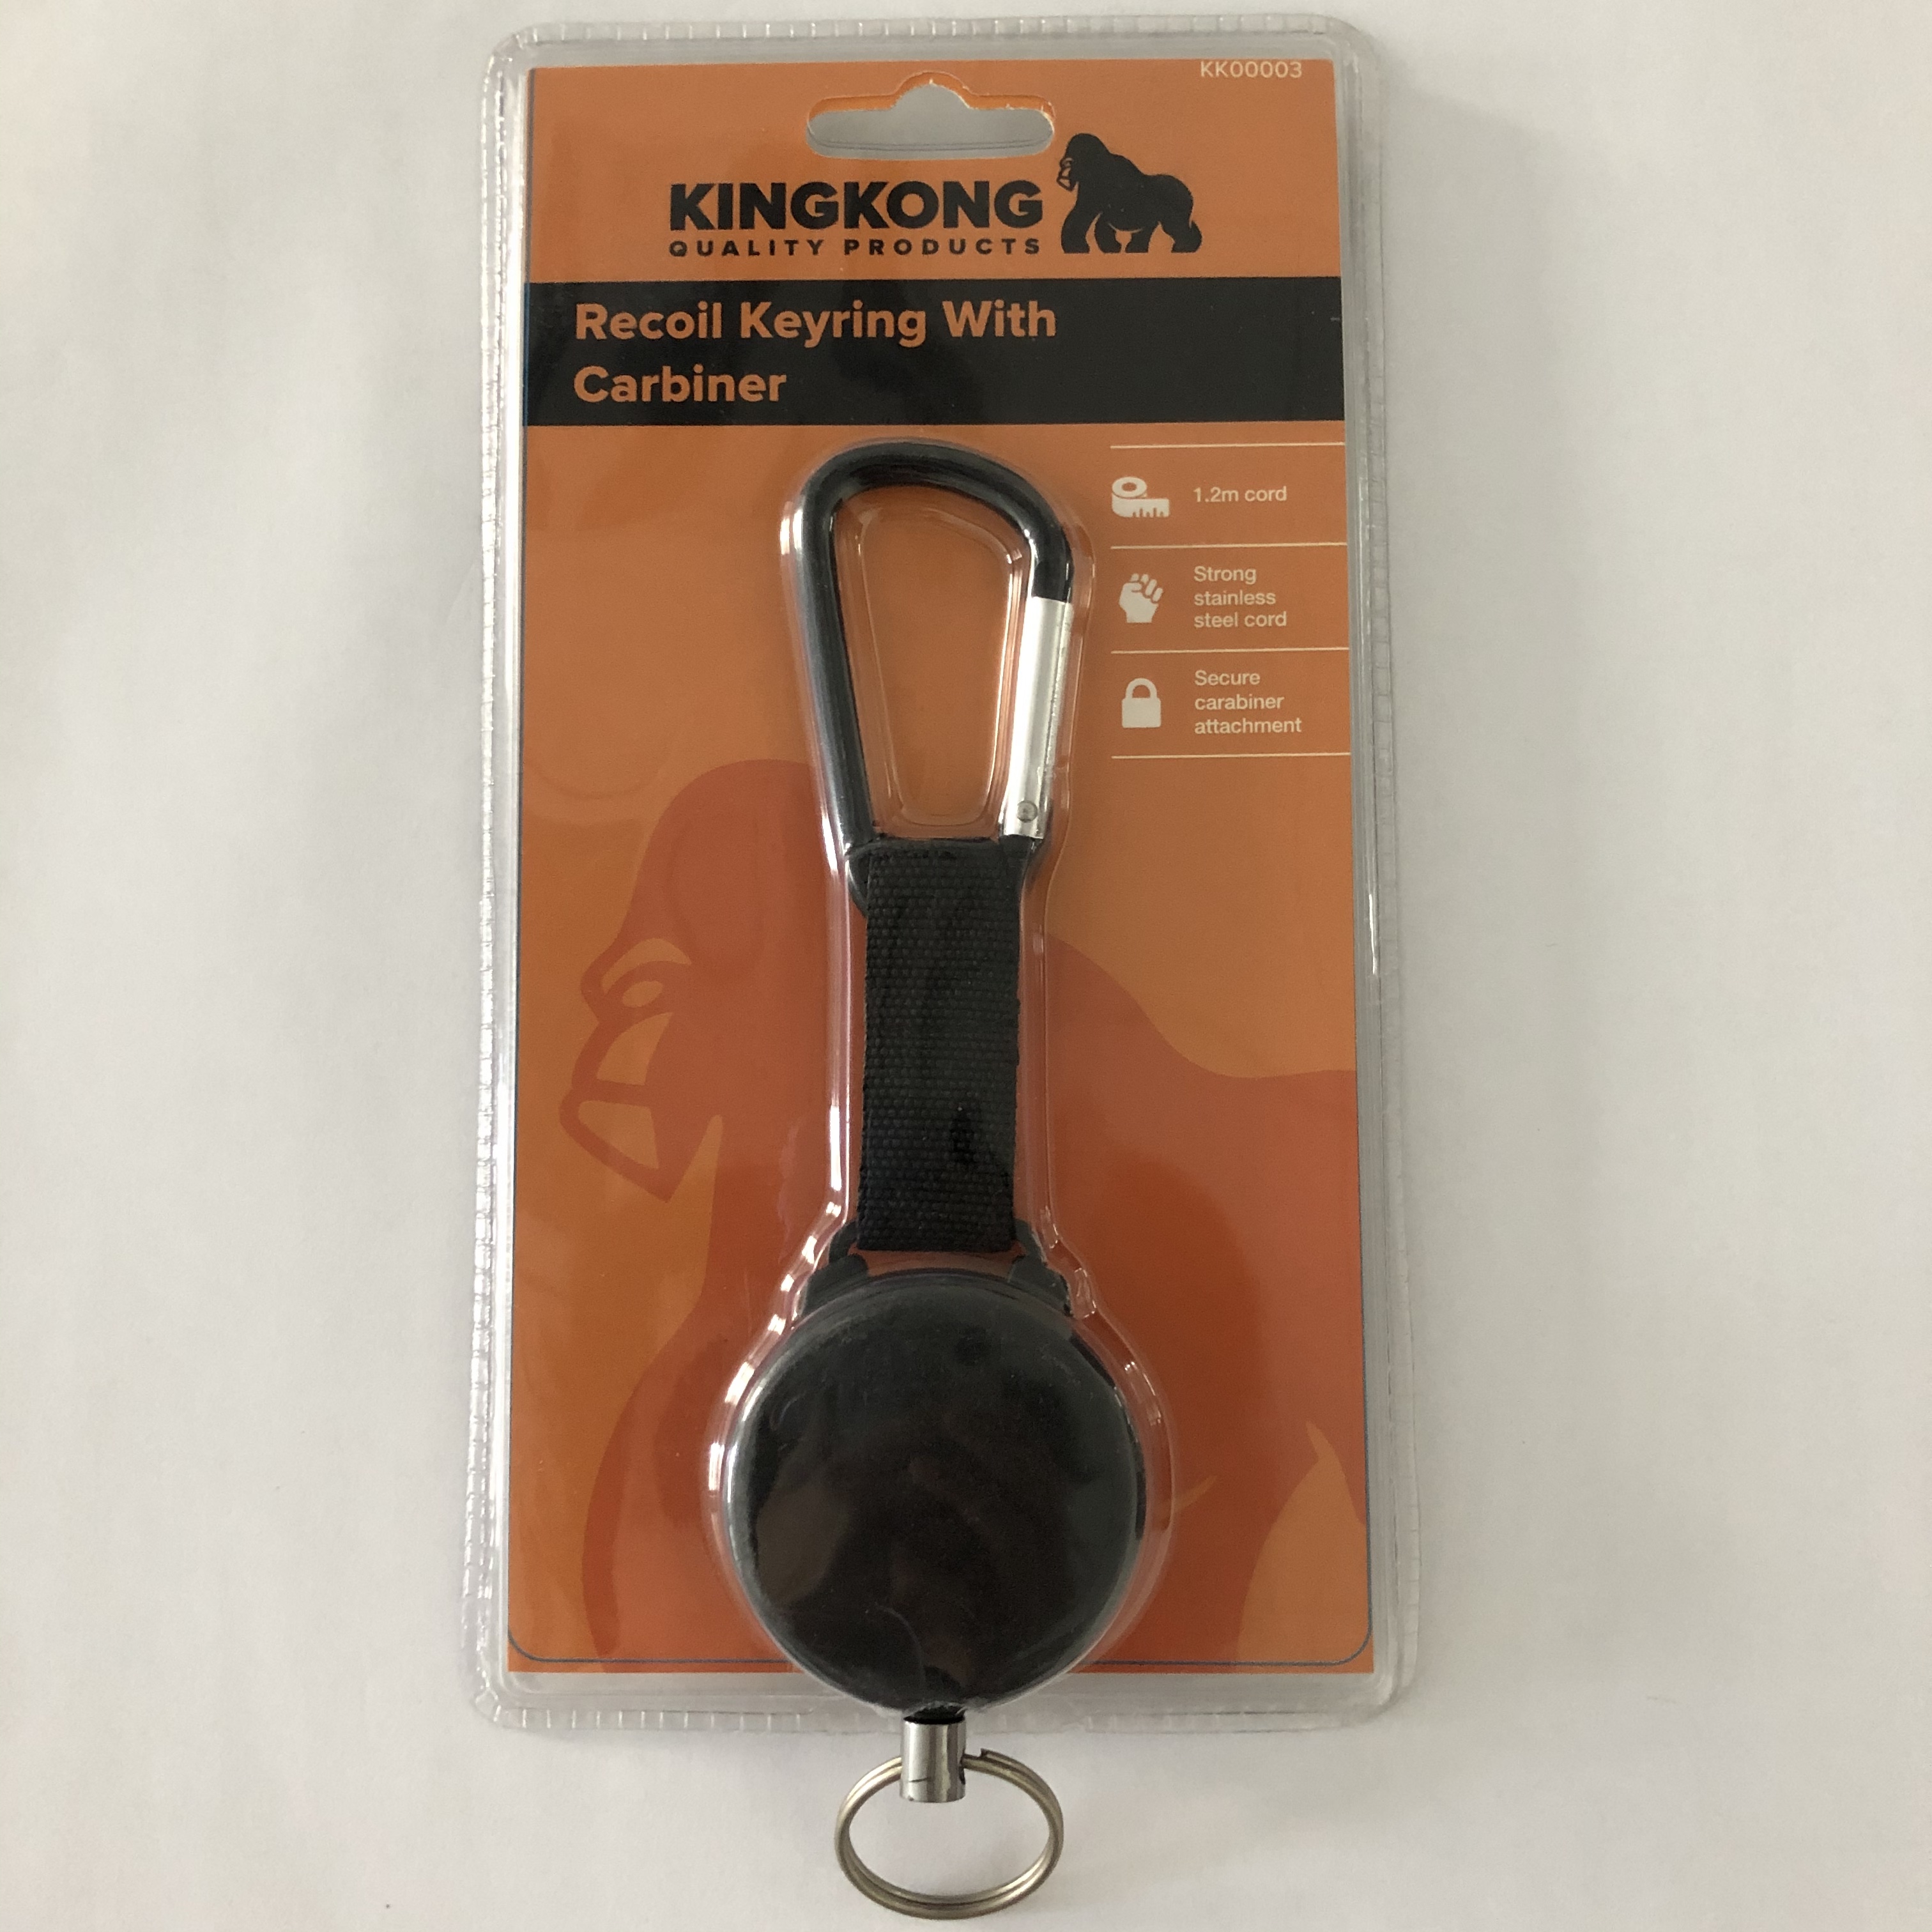 Recoil Keyring With Carbiner